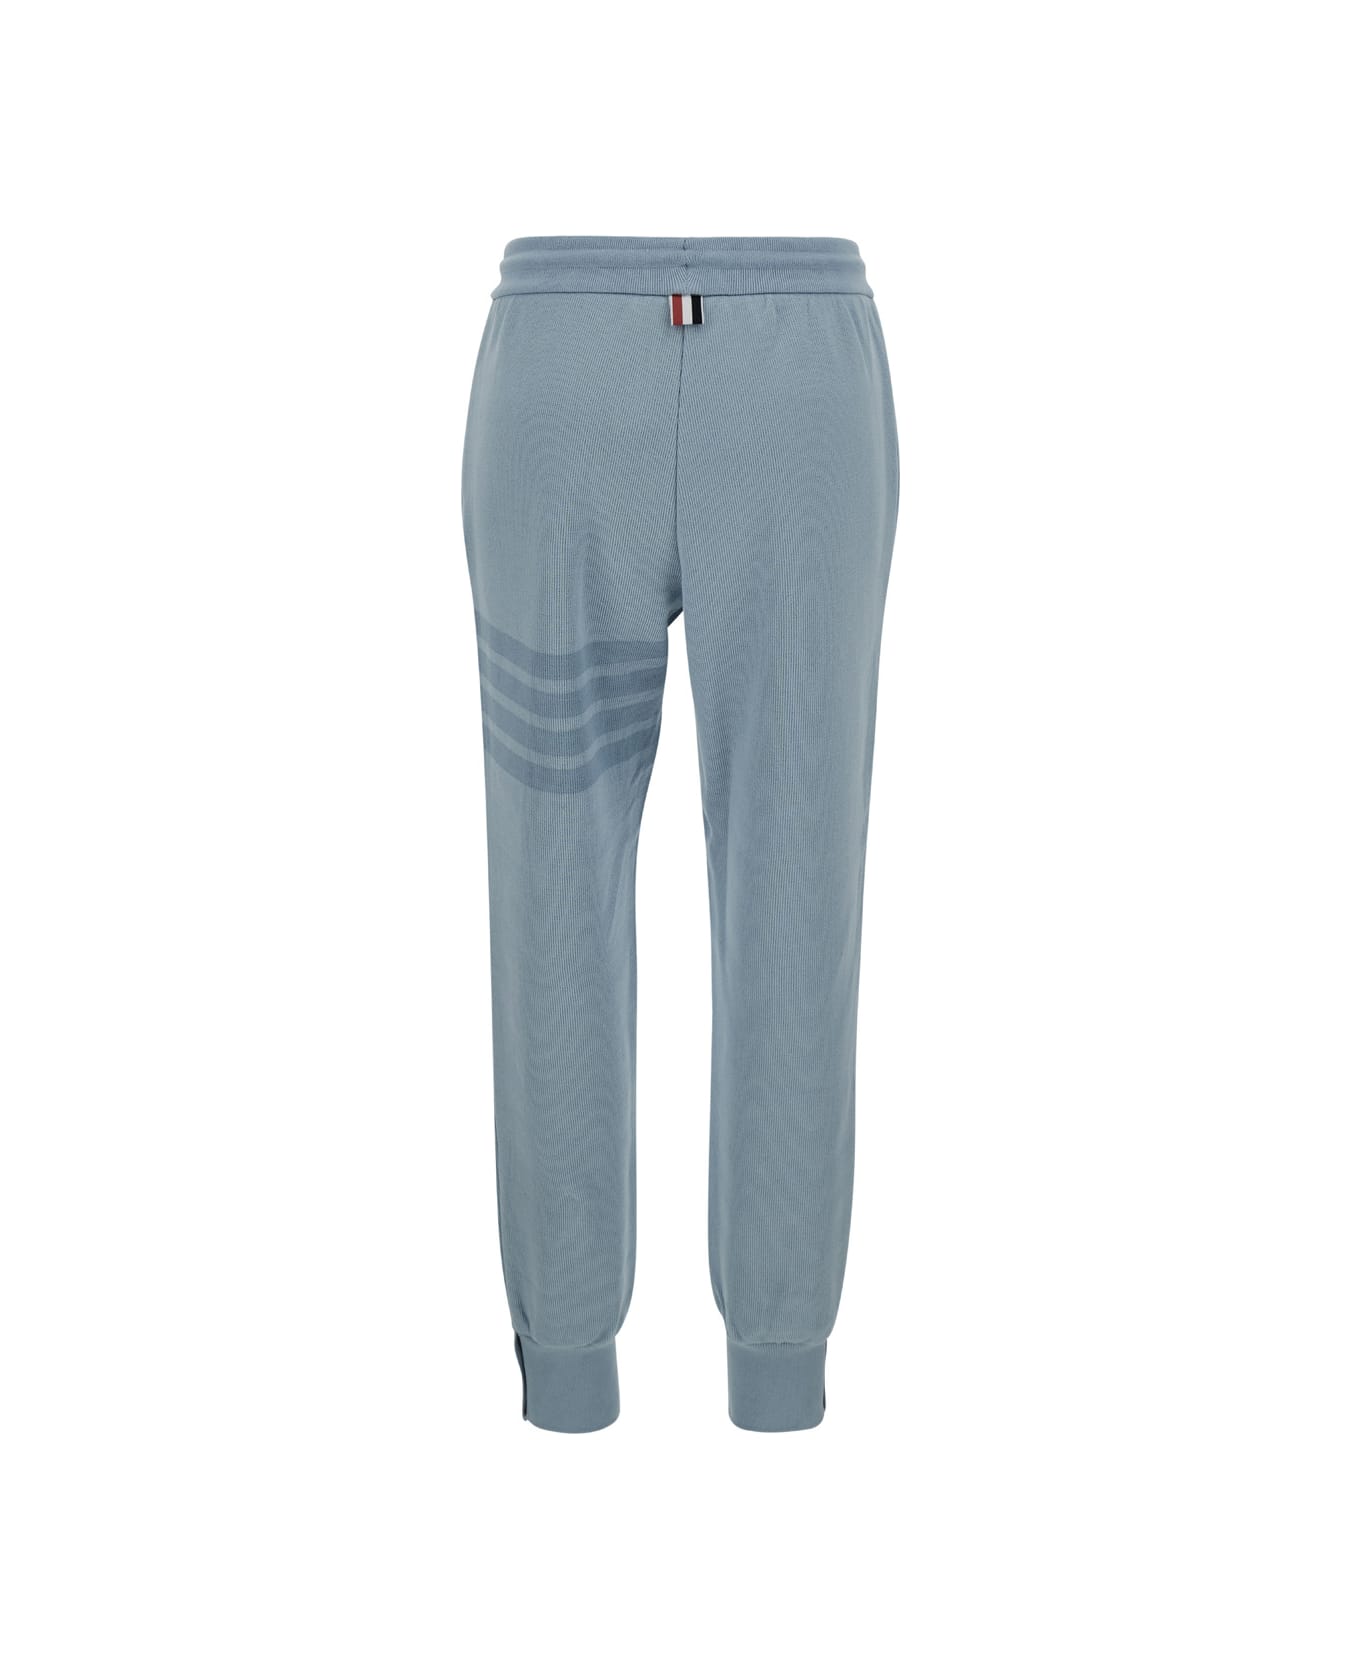 Thom Browne Sweatpants In Double Face Knit W/ Tonal Eng 4 Bar - Light blue